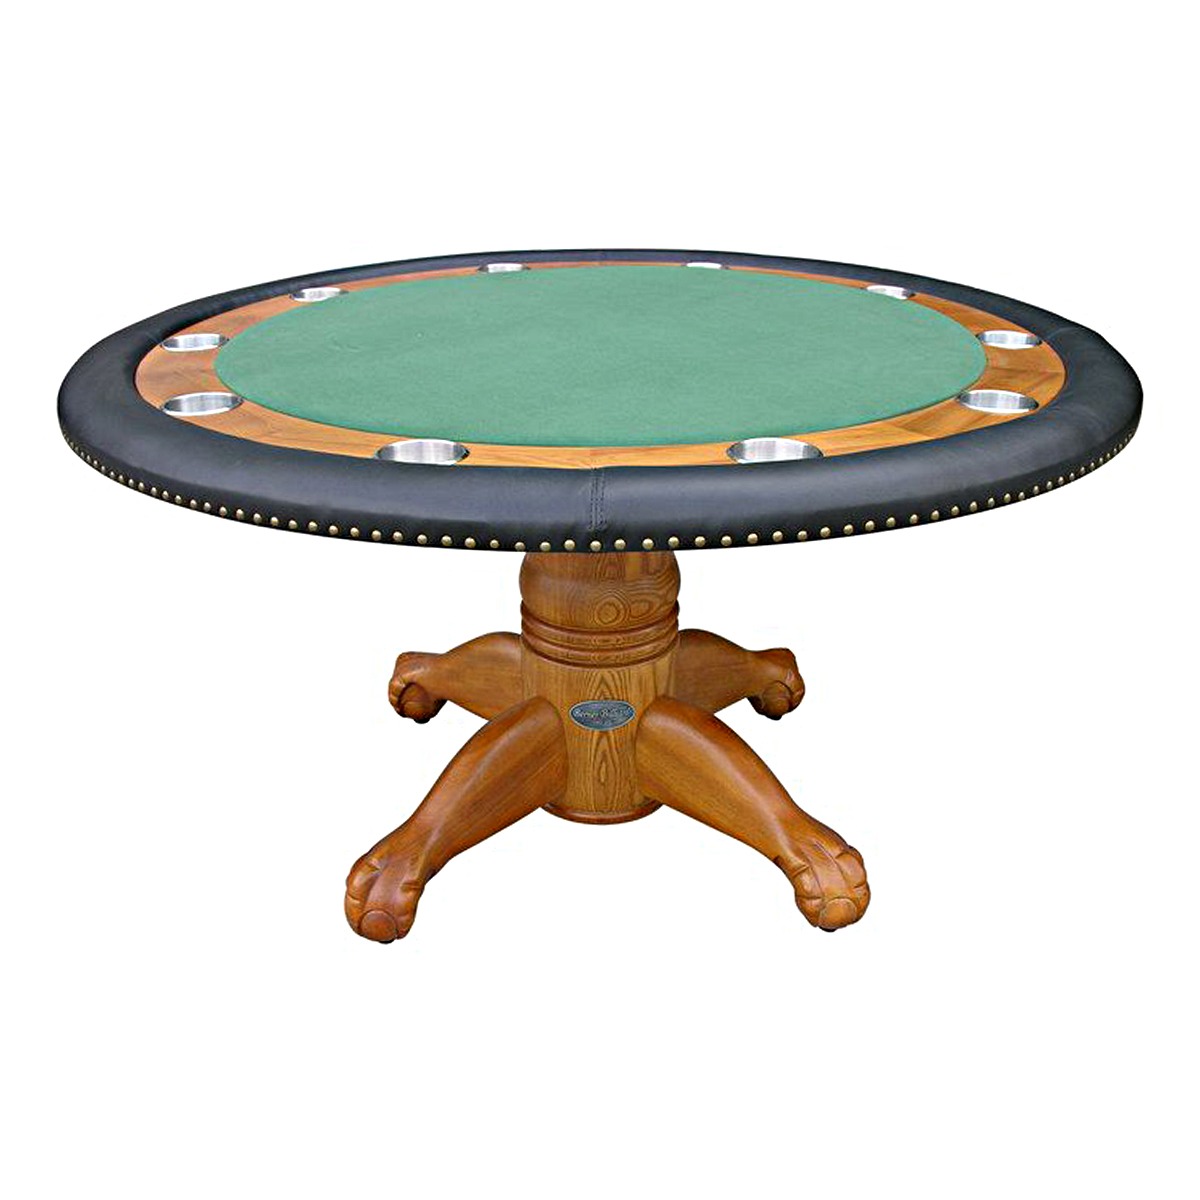 Poker-Table-with-Dining-Top-60-Oak-1-1.jpg